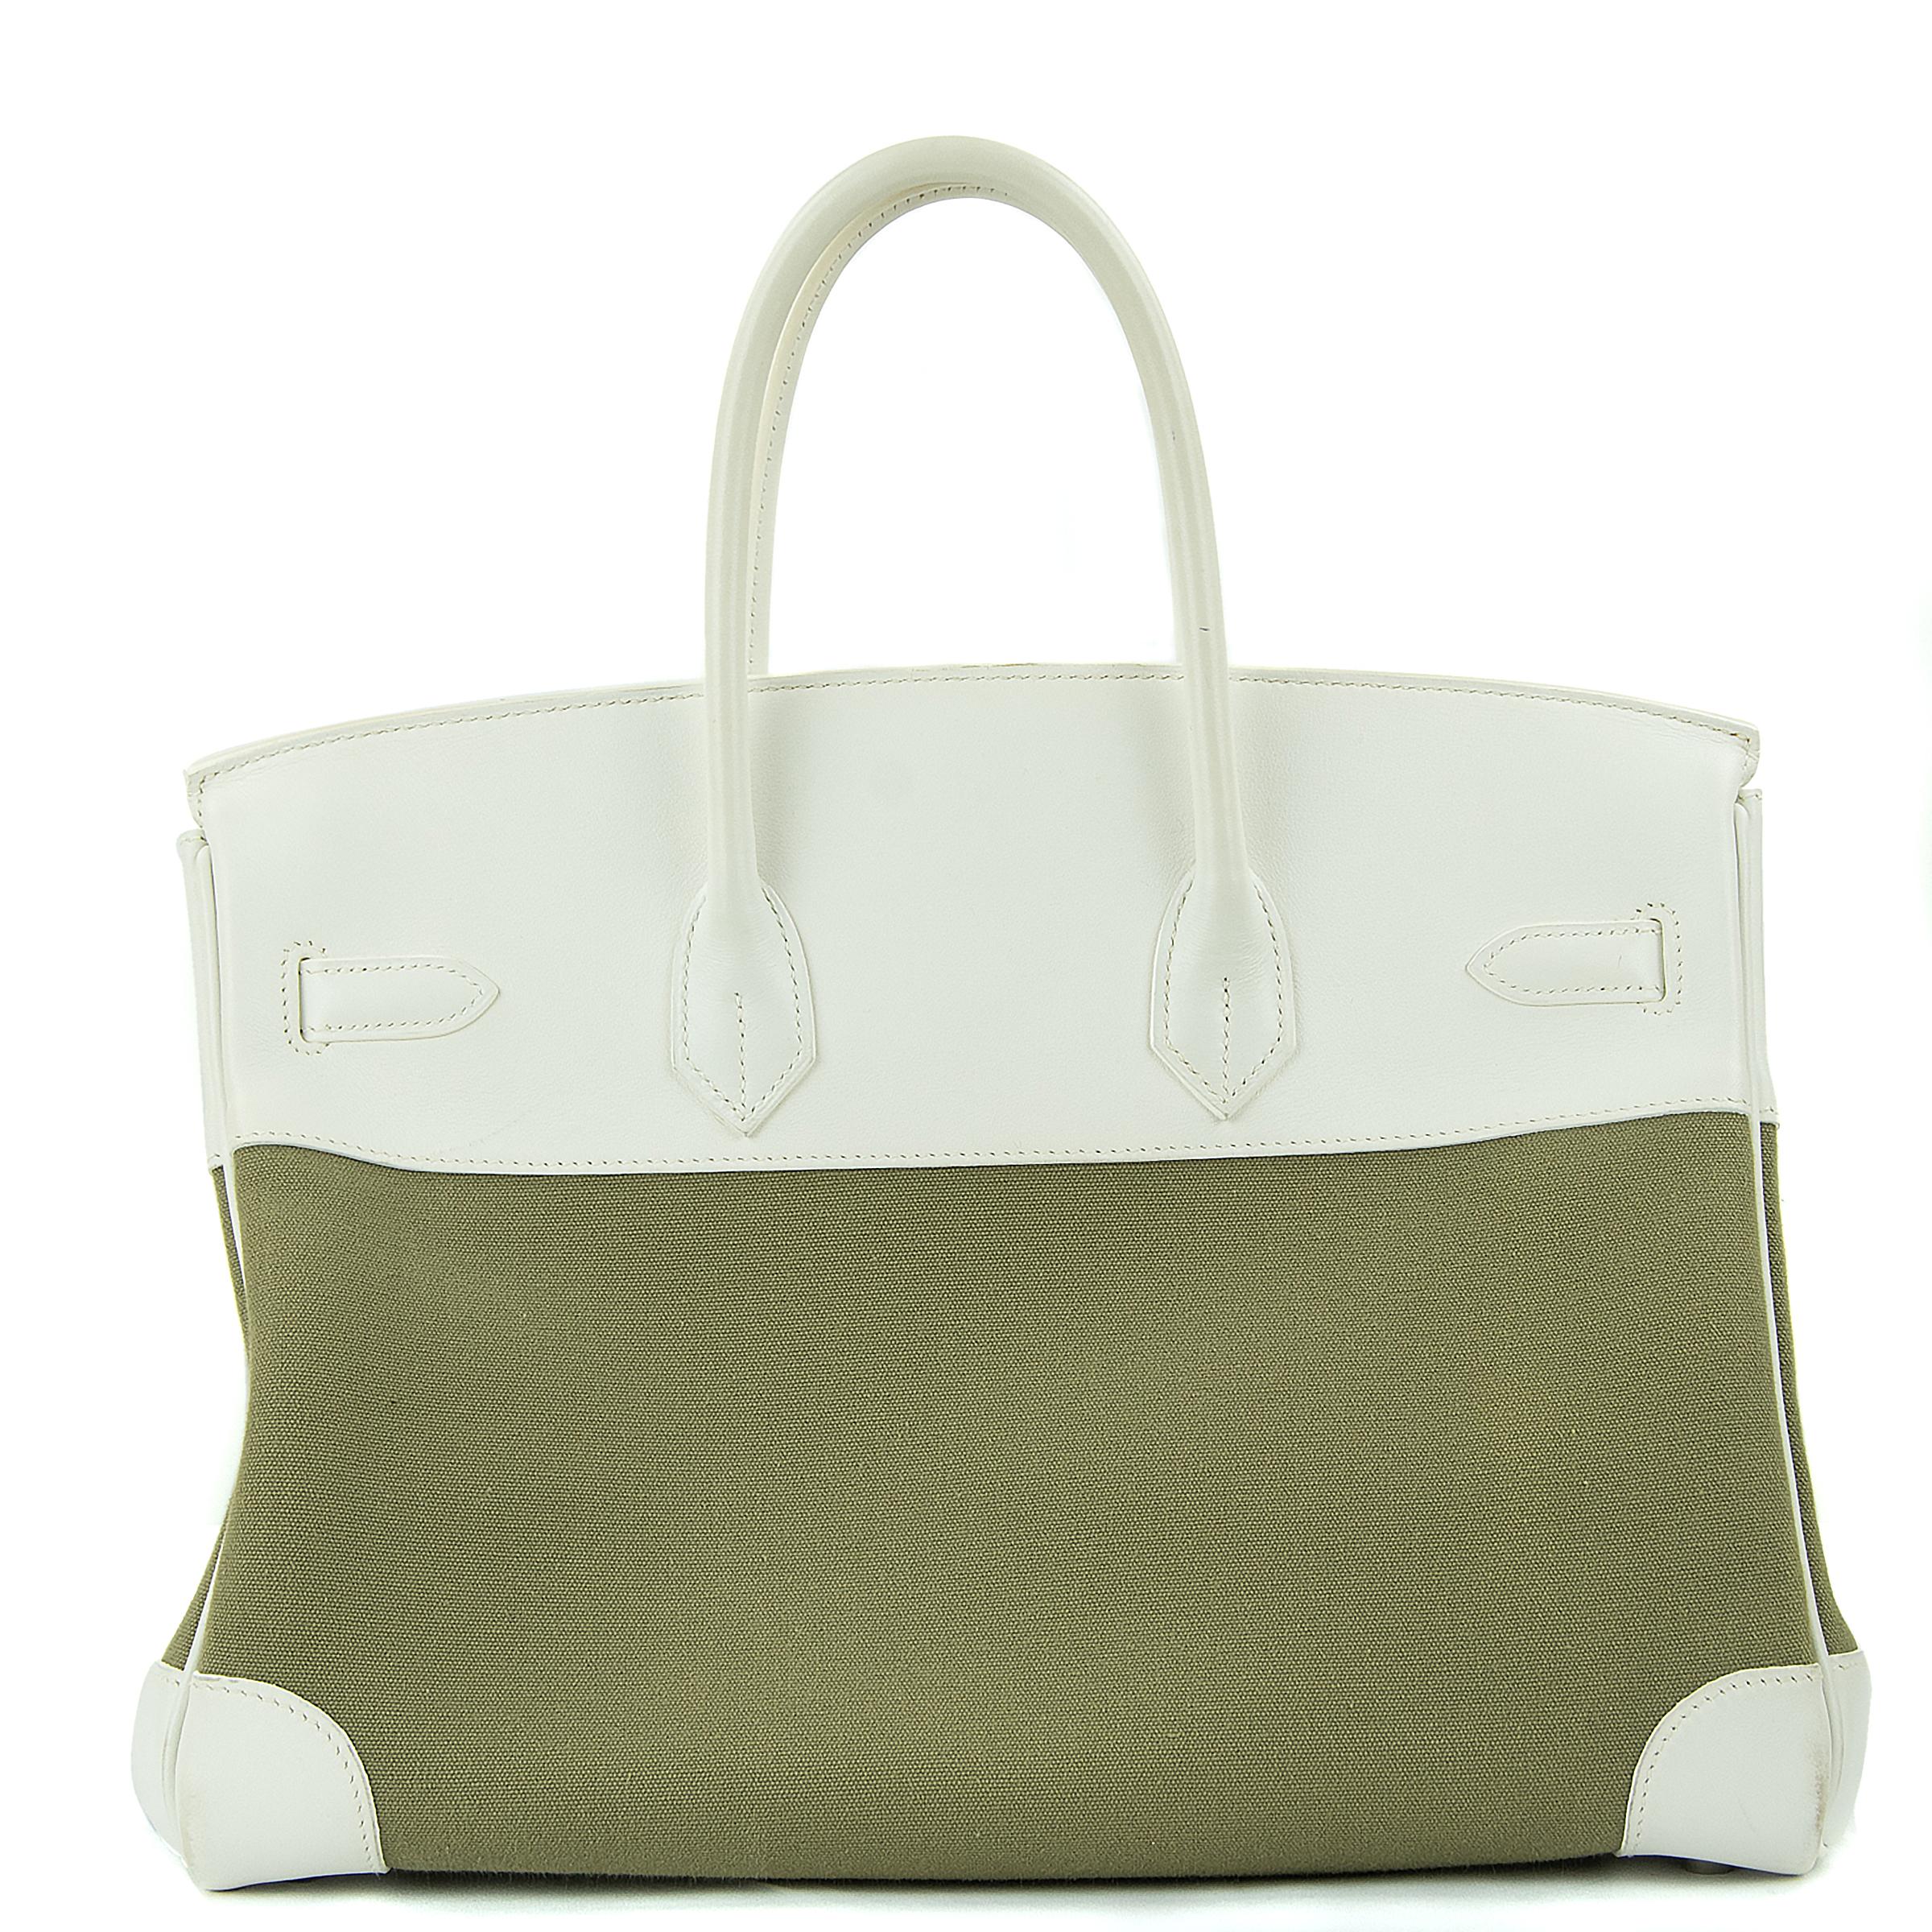 Hermes 35cm Birkin bag in Olive Matiere Toile Officier Canvas Couchevel White Leather. This iconic special order Hermes Birkin bag is timeless and chic. Fresh and crisp with palladium hardware.

    Condition: Excellent, Previously Used
    Made in